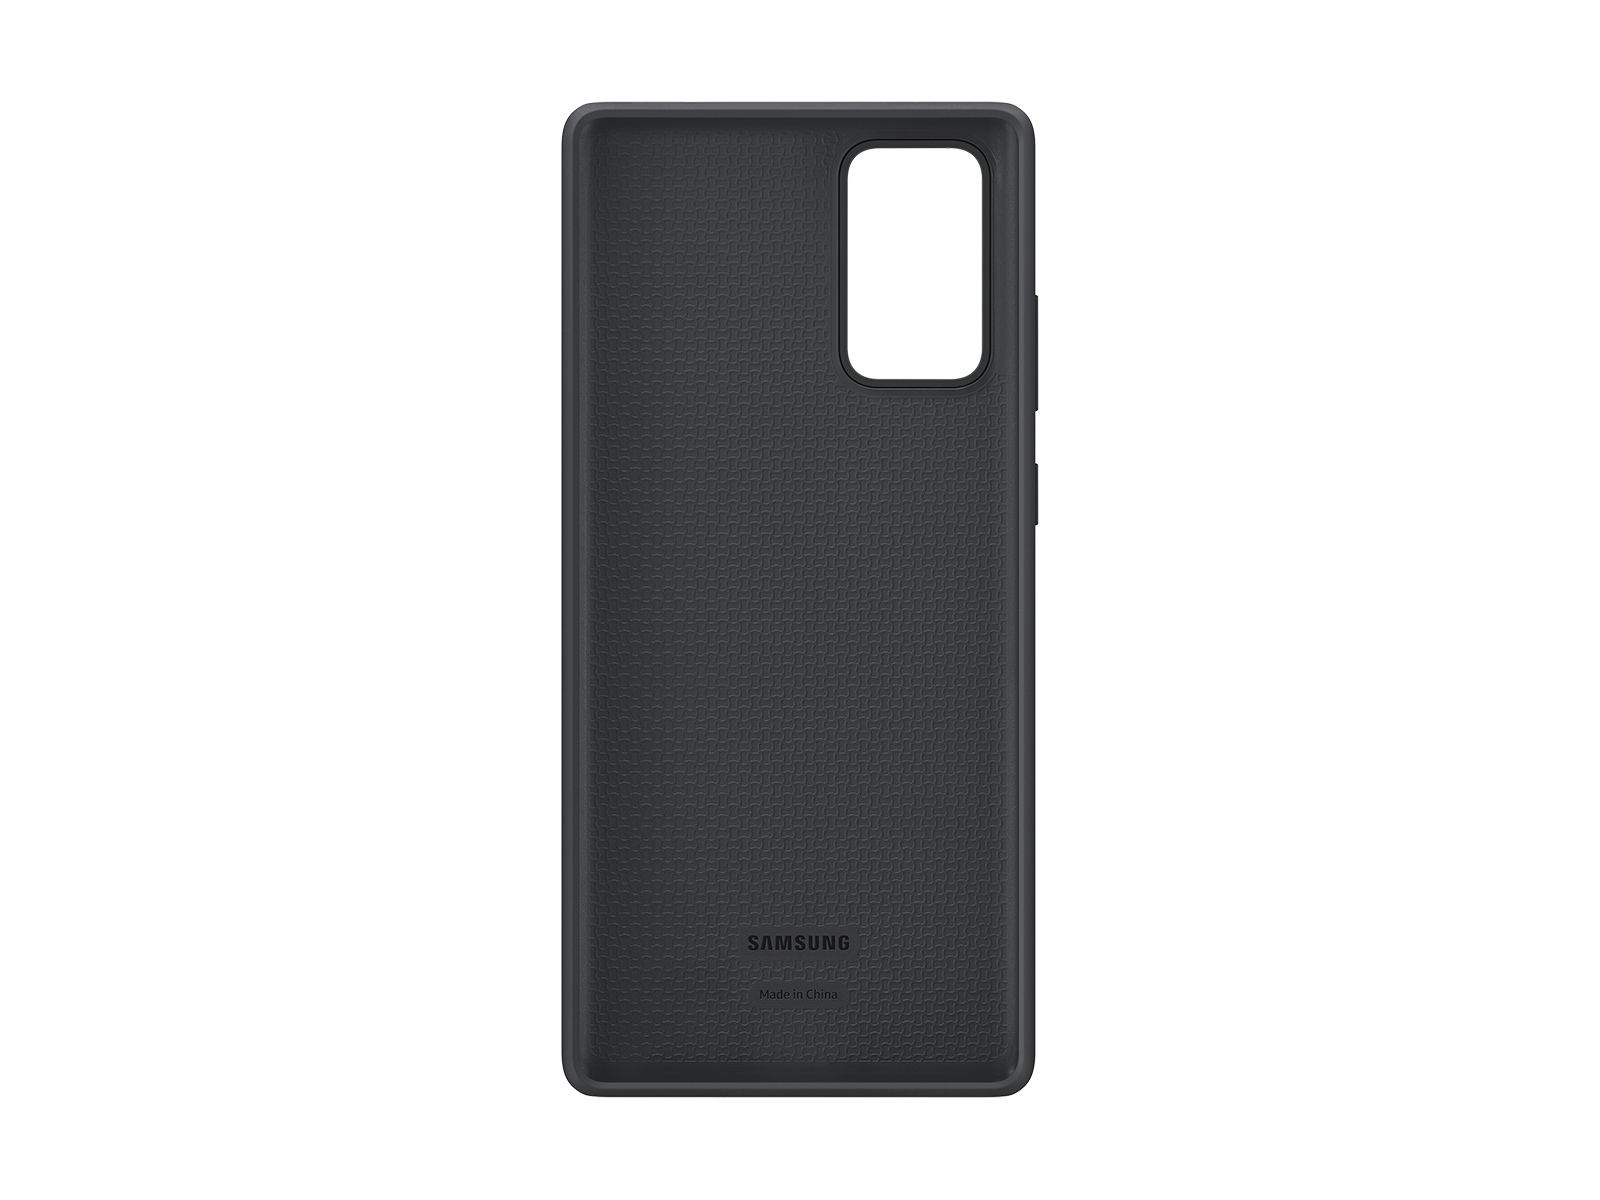 Thumbnail image of Galaxy Note20 5G Silicone Cover, Black